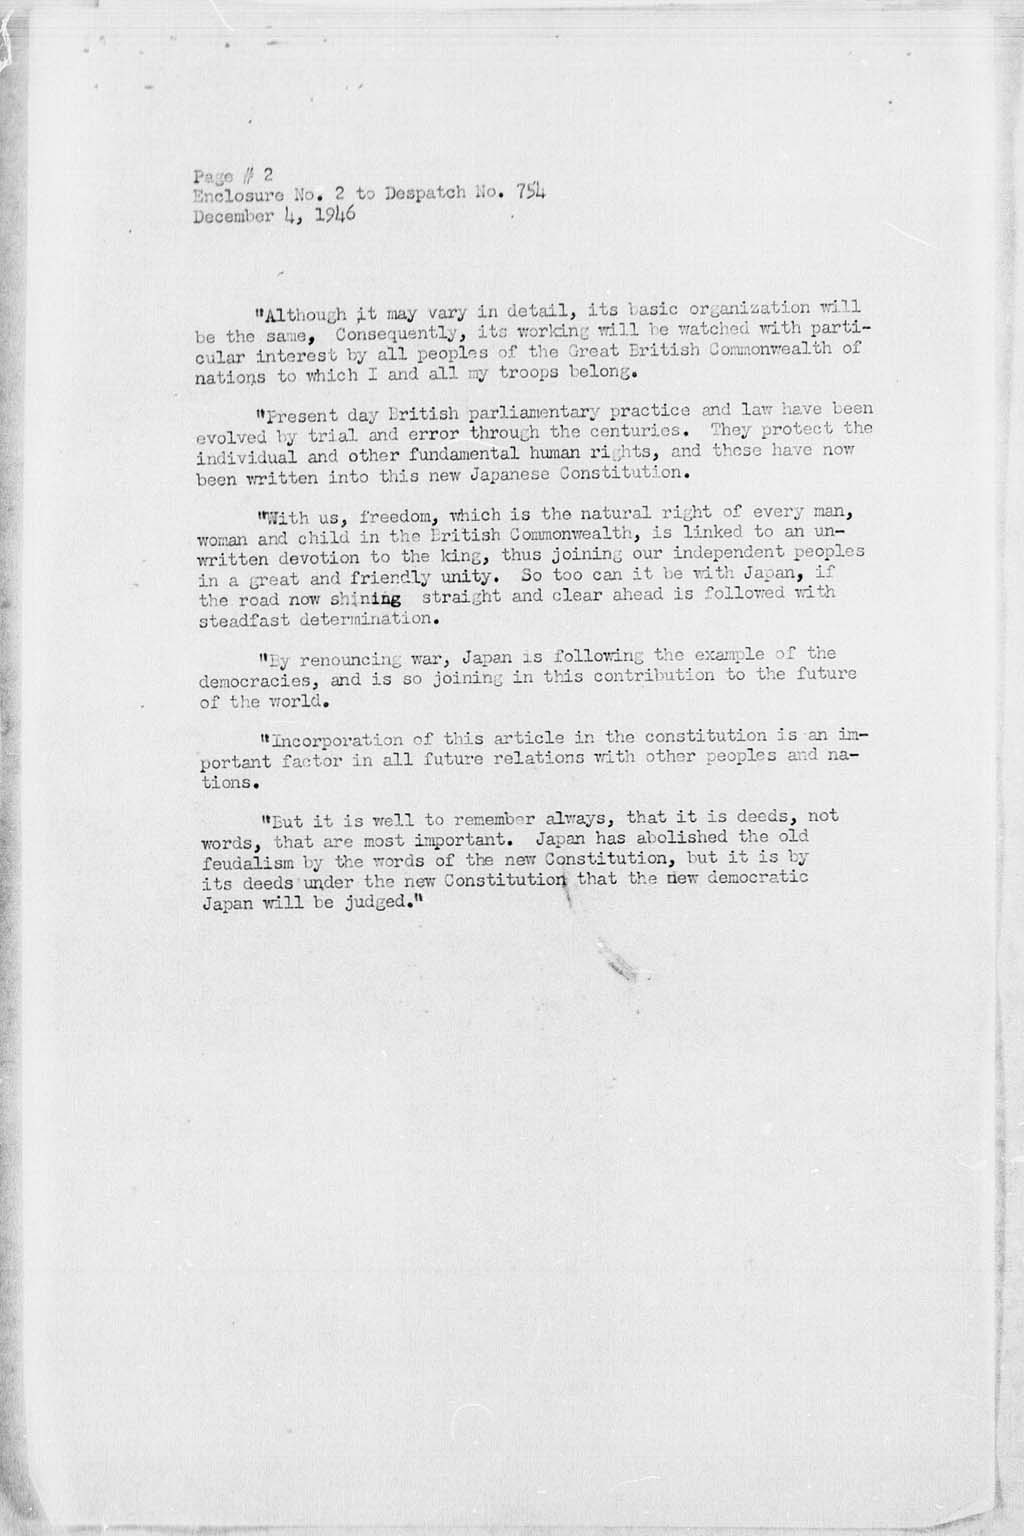 [Subject: Statements Concerning New Japanese Constitution by Members of Allied Council for Japan](Larger image)